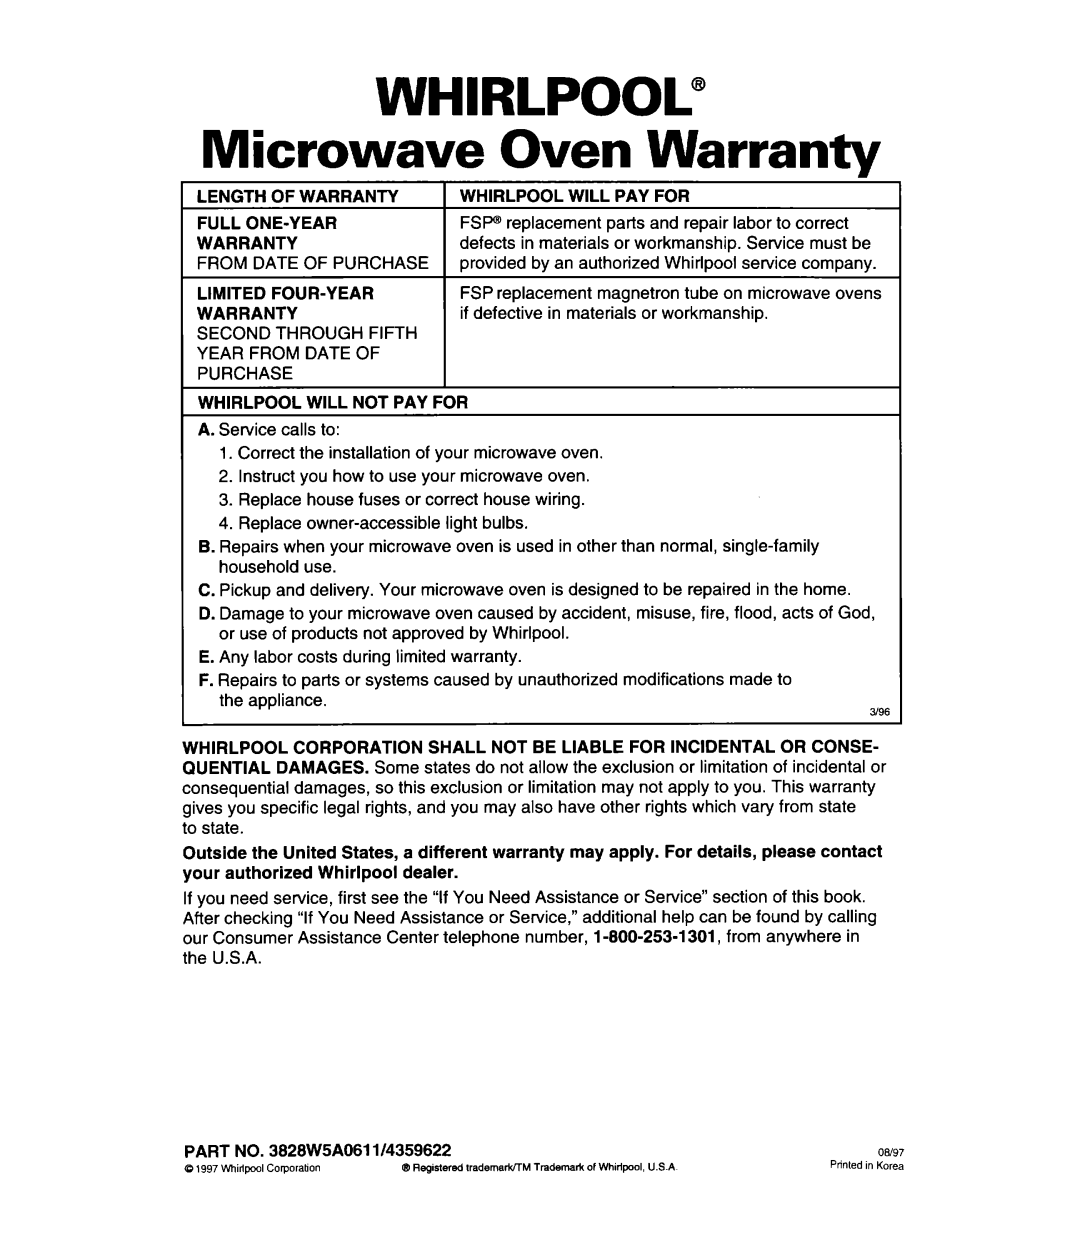 Whirlpool MH7130XE Whirlpool@, LENGTHOFWARRANTY 1 WHIRLPOOL WILL PAY FOR, Full One-Year, Warranty, Limited Four-Year 